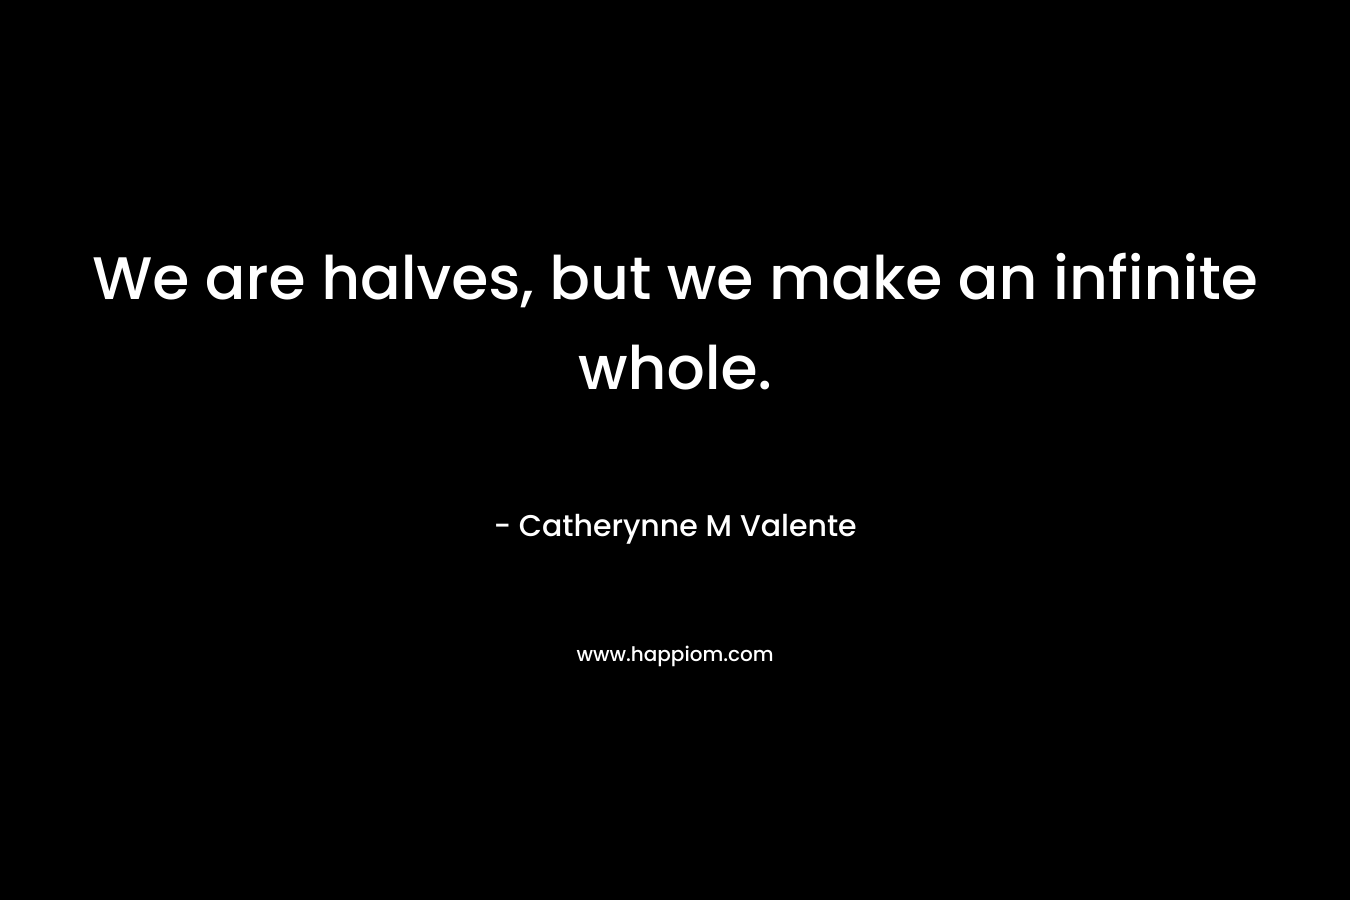 We are halves, but we make an infinite whole.